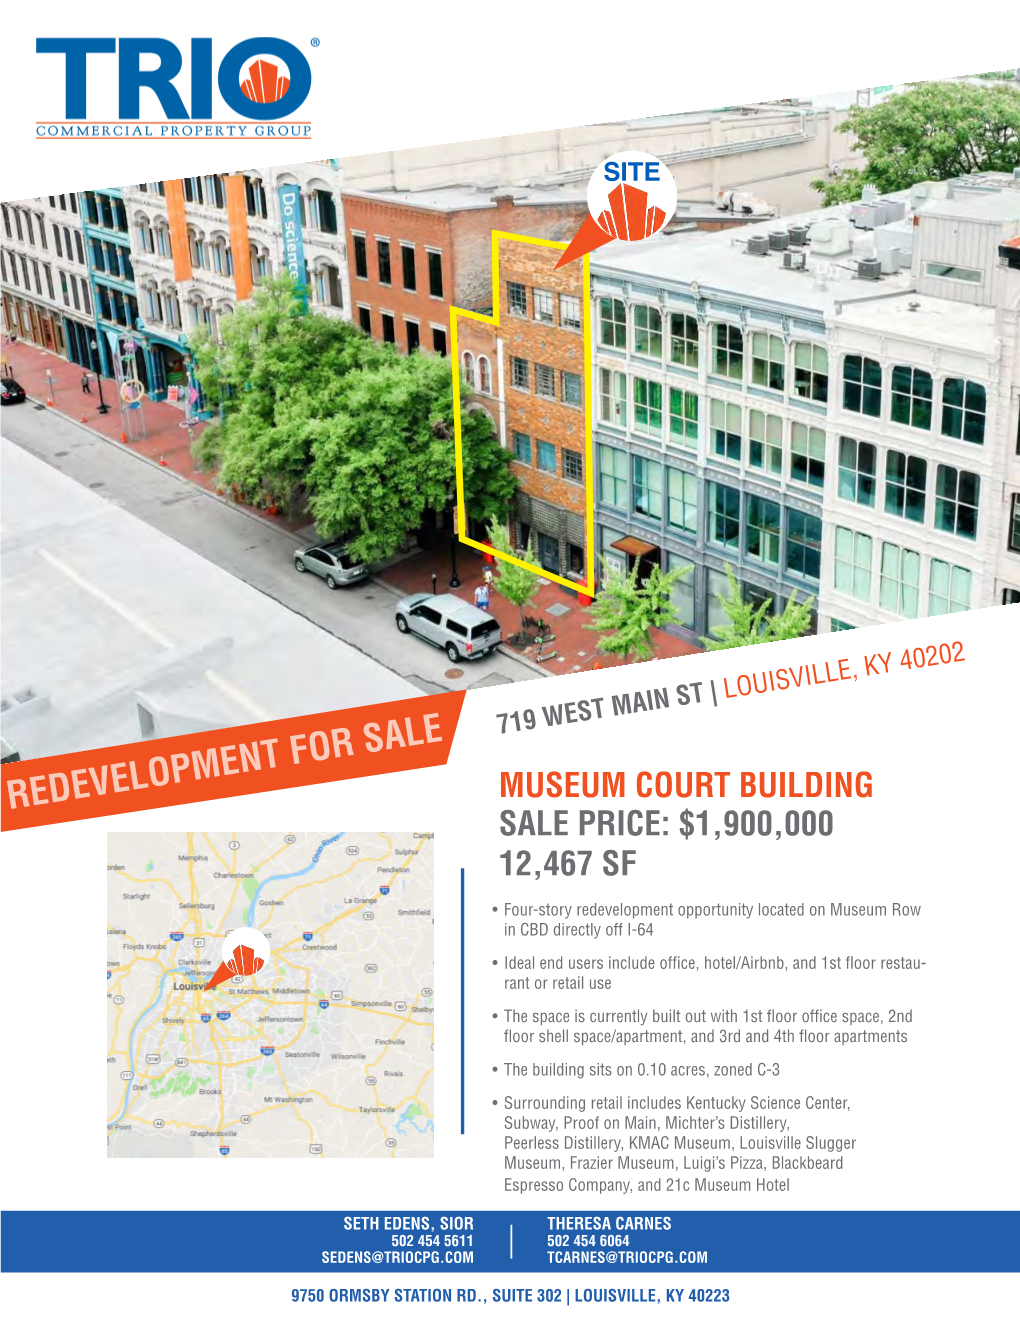 Redevelopment for Sale Museum Court Building Sale Price: $1,900,000 12,467 Sf ±